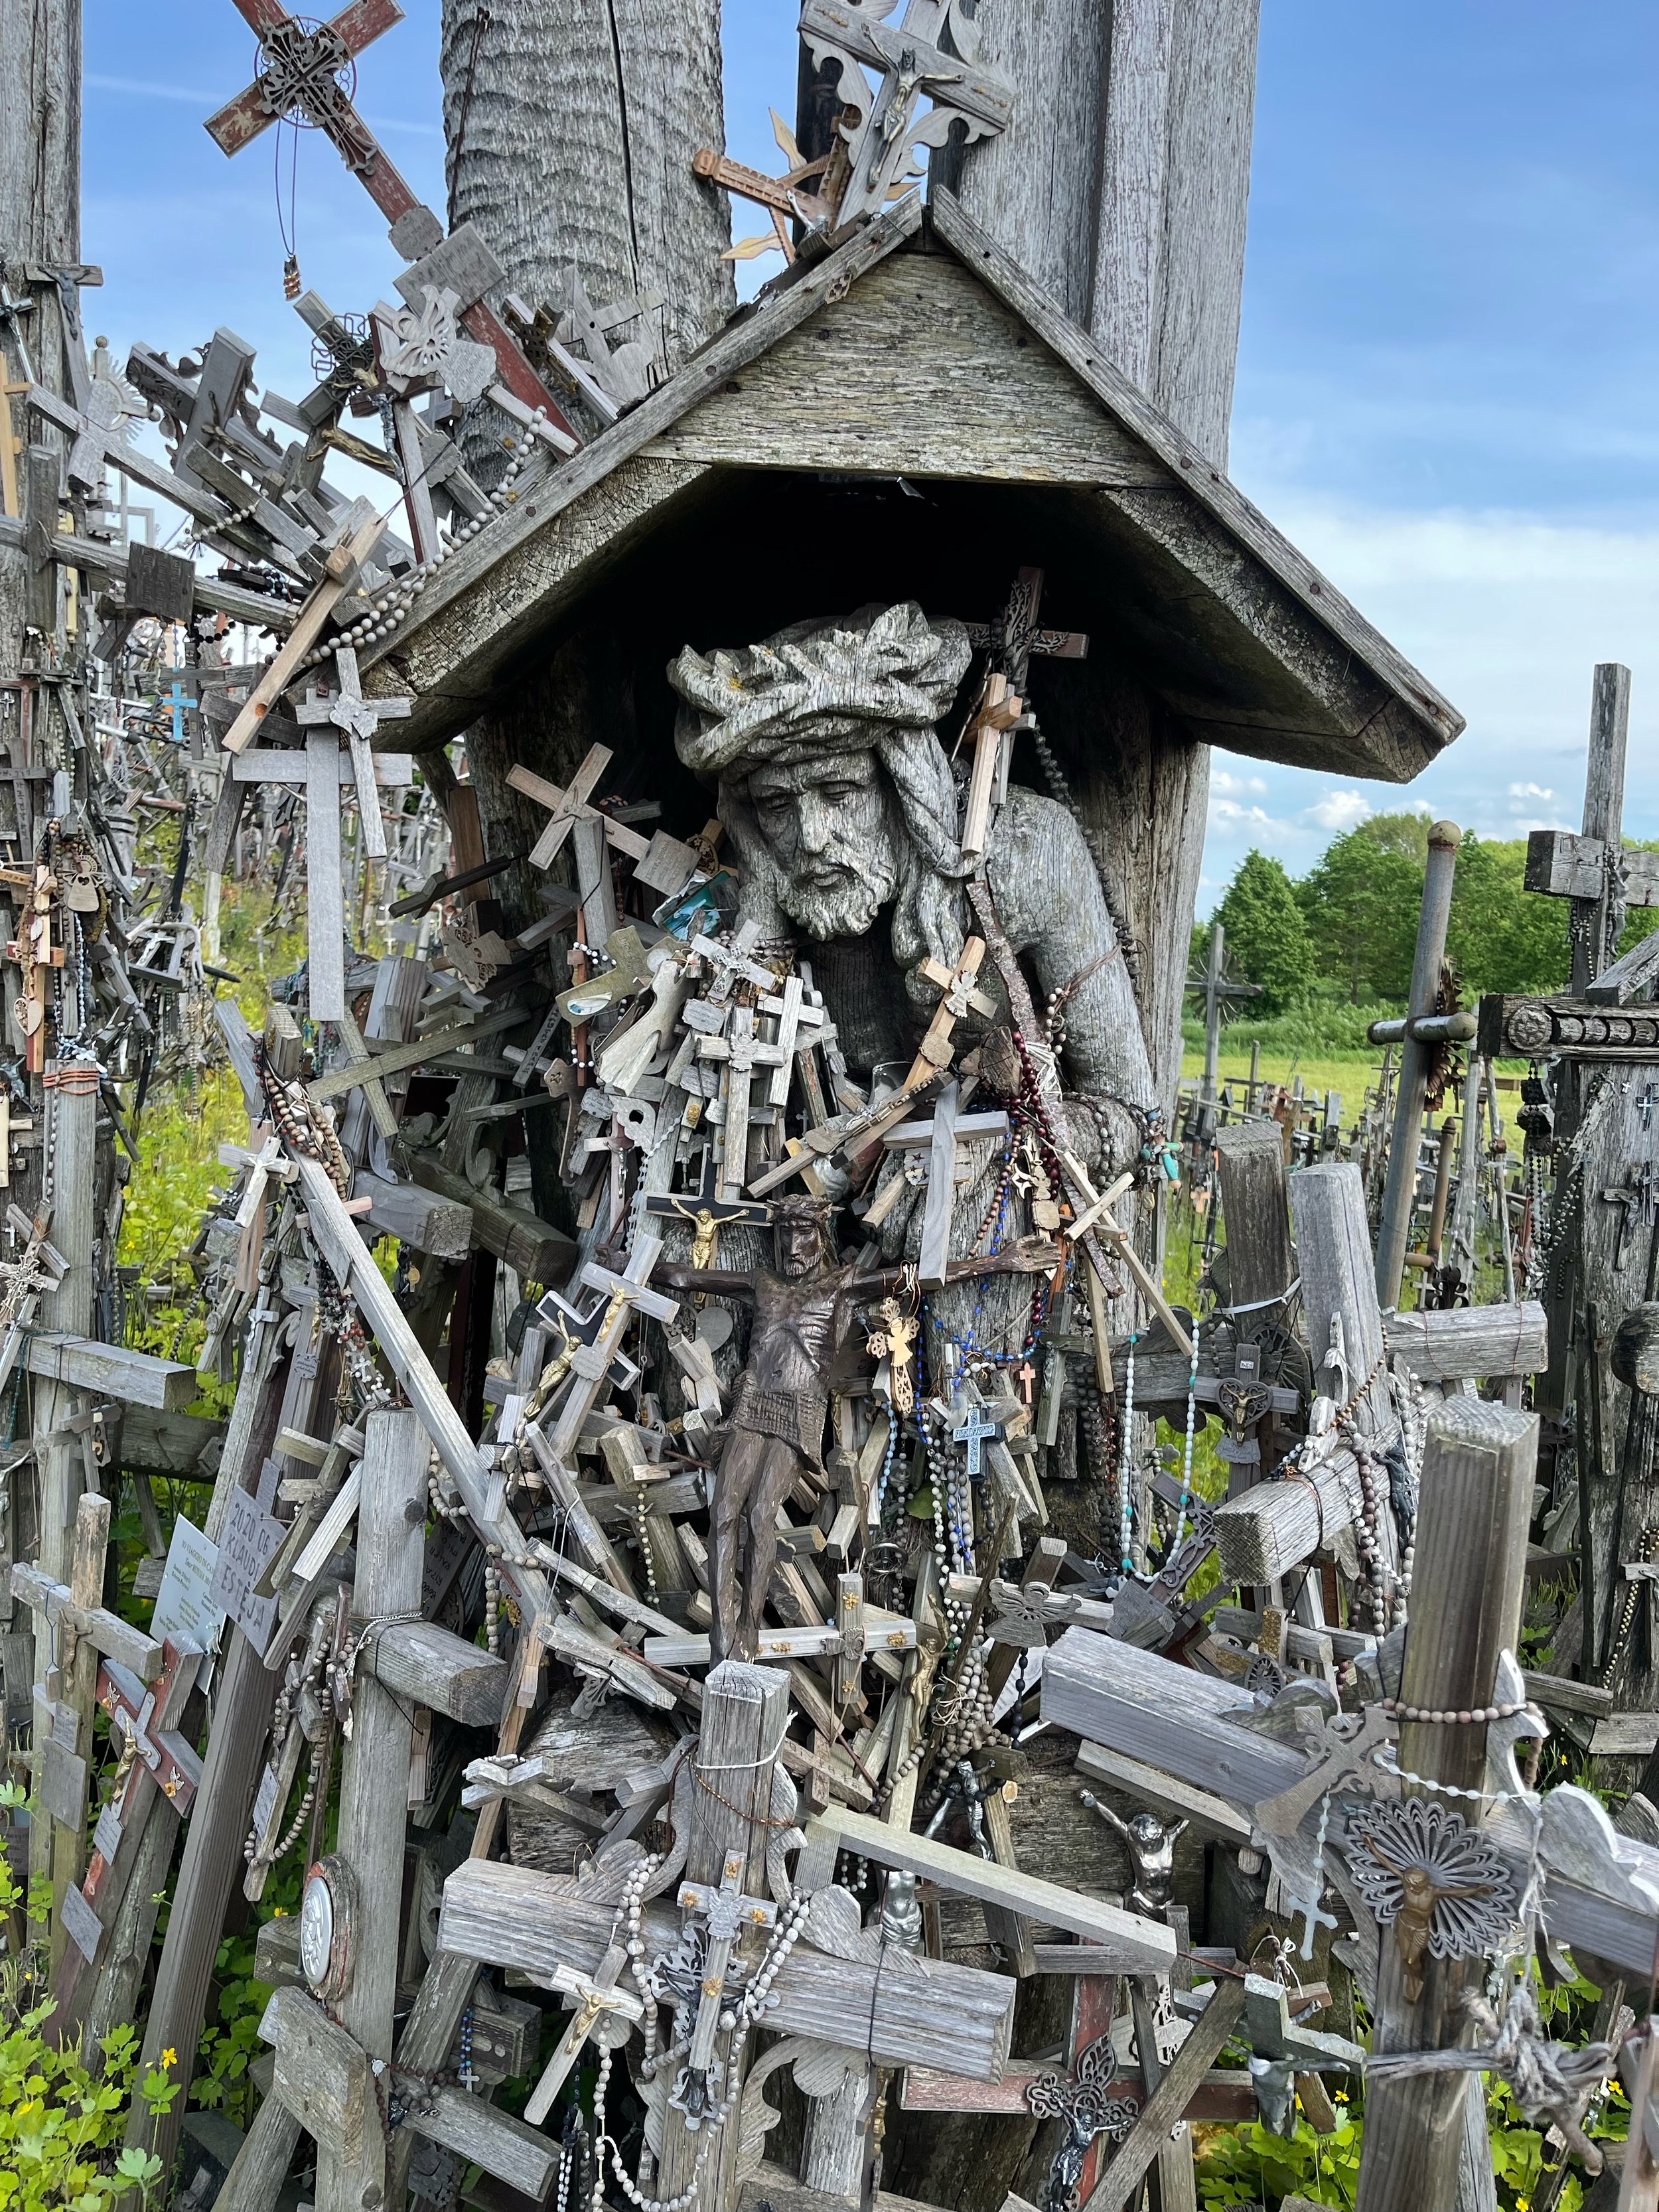   The Hill of Crosses  